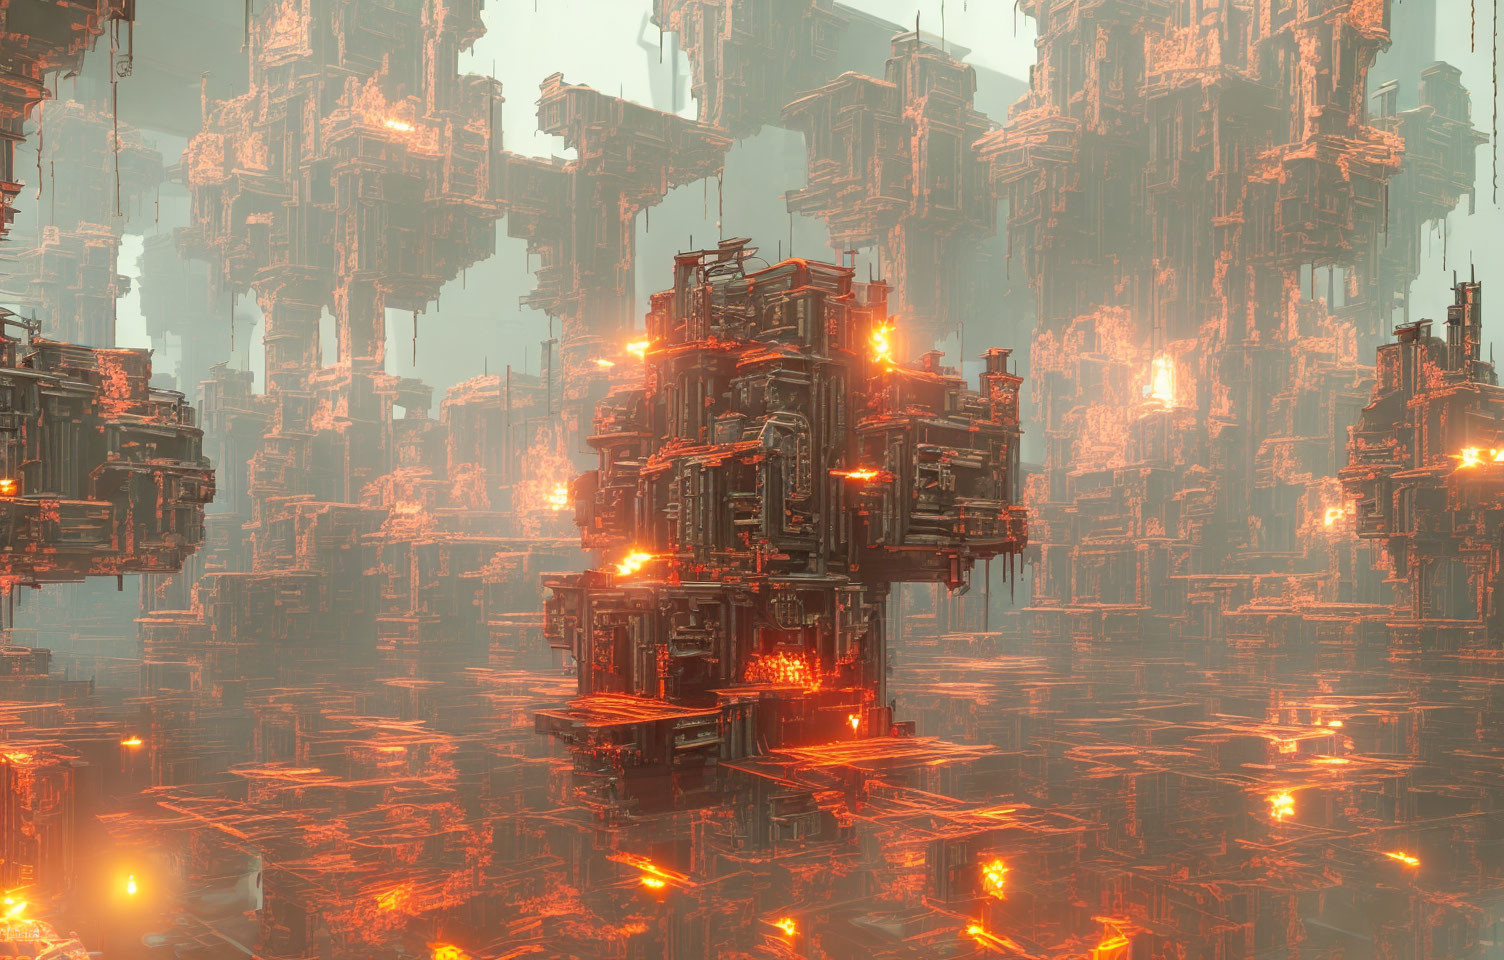 Futuristic cityscape with towering structures in hazy orange glow